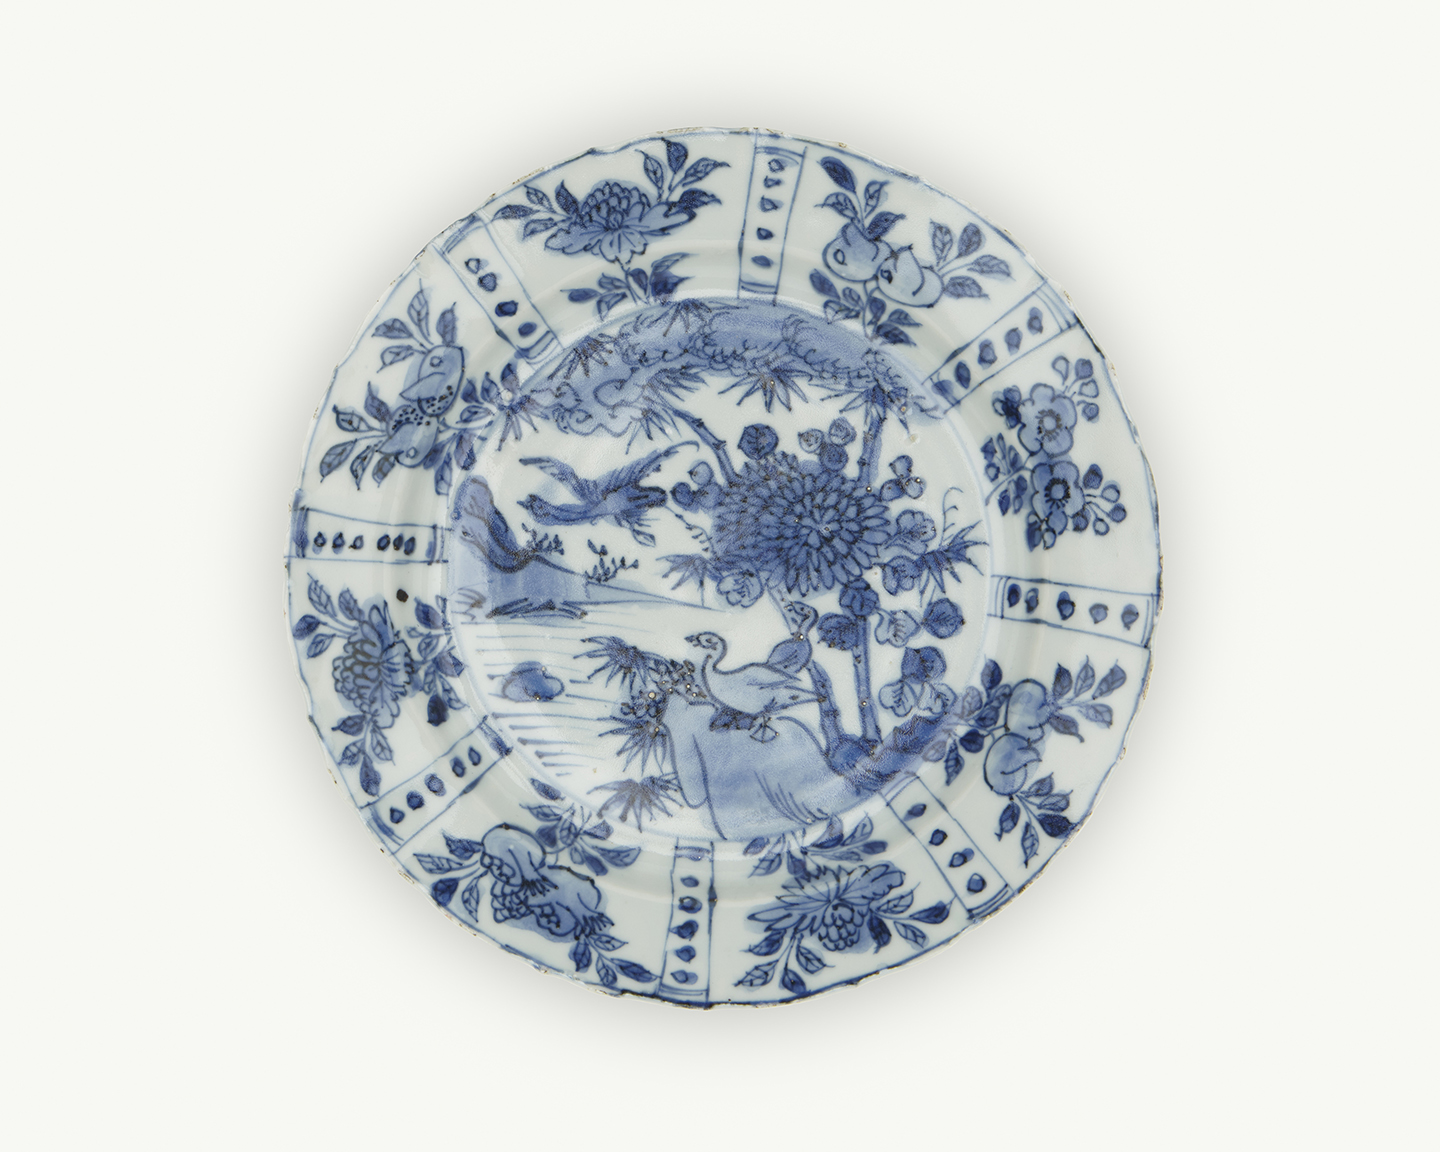 A white plate decorated with blue flowers and birds.